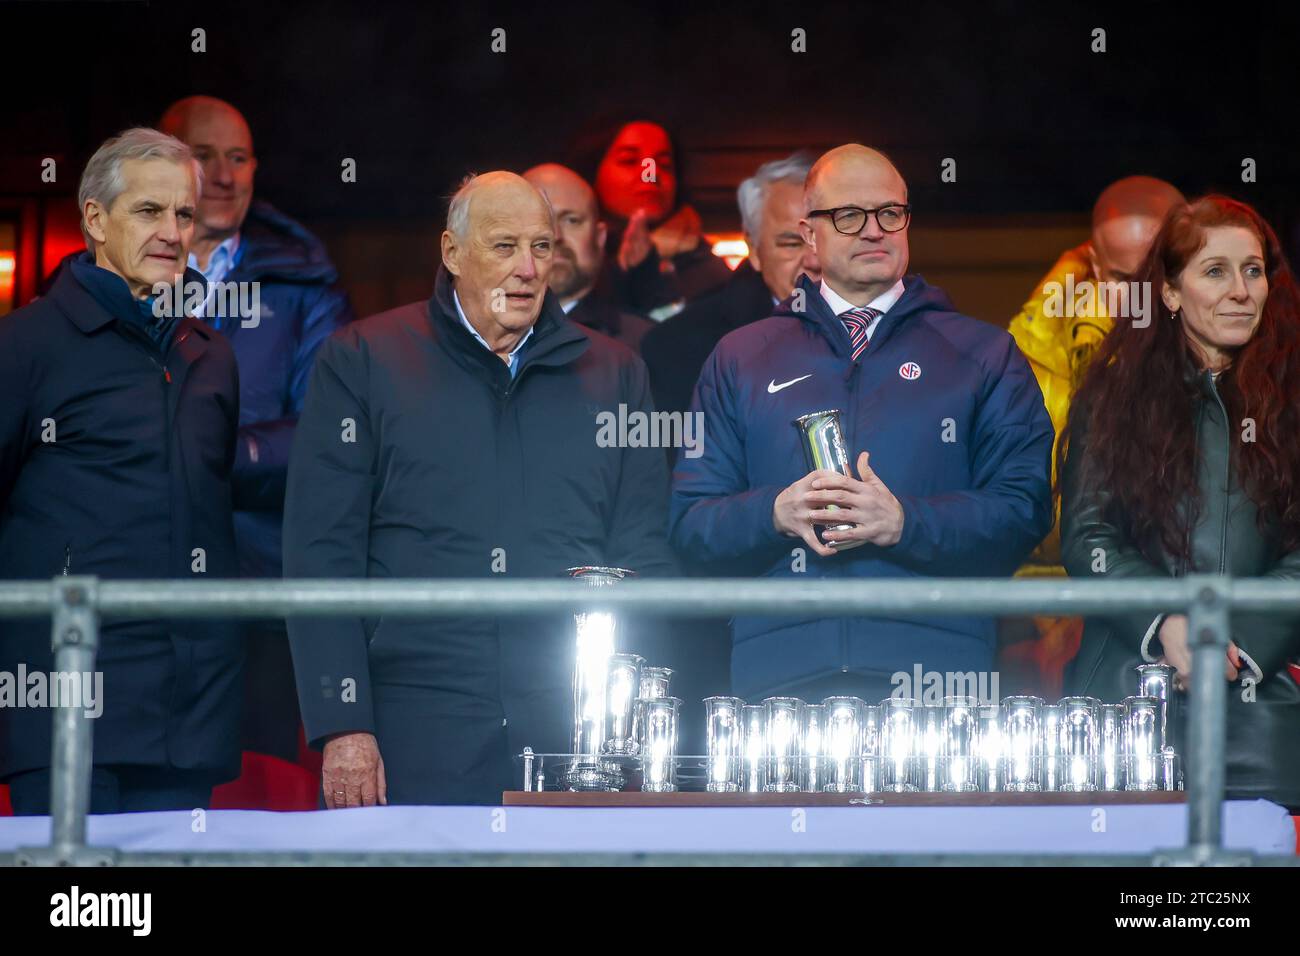 Oslo, Norway, 9th December 2023. The Norwegian Prime Minister Jonas Gahr Støre, the Norwegian King Harald, the General Secretary of NFF Karl Petter Løken and the President of NFF Lise Klaveness prepares to hand out the trophies after the Norwegian Cup Final between Bodø/Glimt and Molde at Ullevål Stadium in Oslo   Credit: Frode Arnesen/Alamy Live News Stock Photo